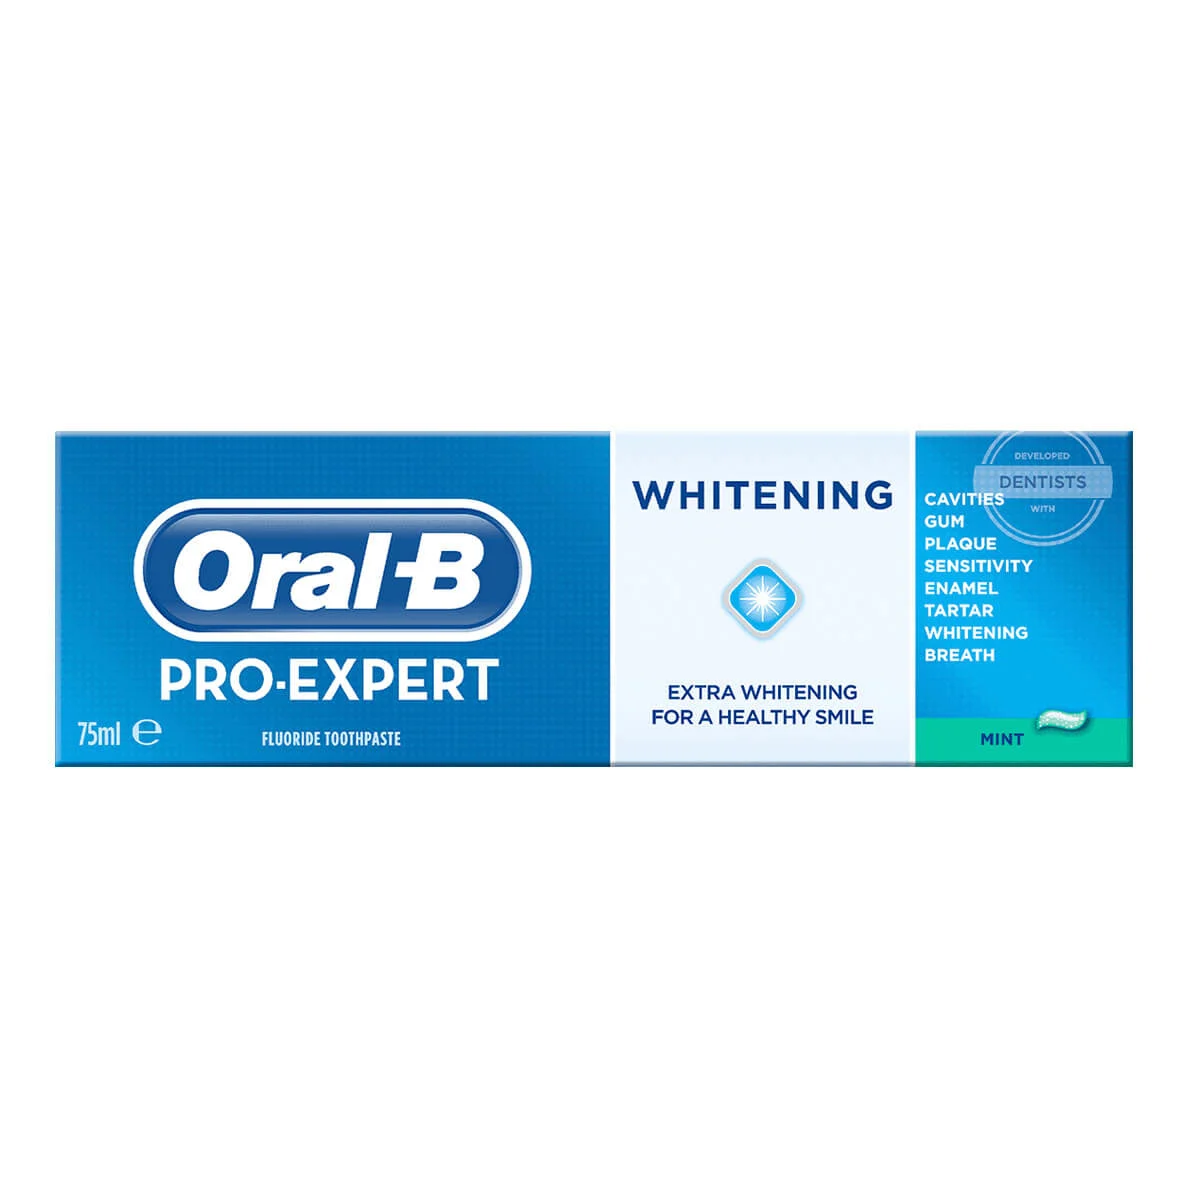 Oral-B Pro-Expert Whitening Toothpaste undefined